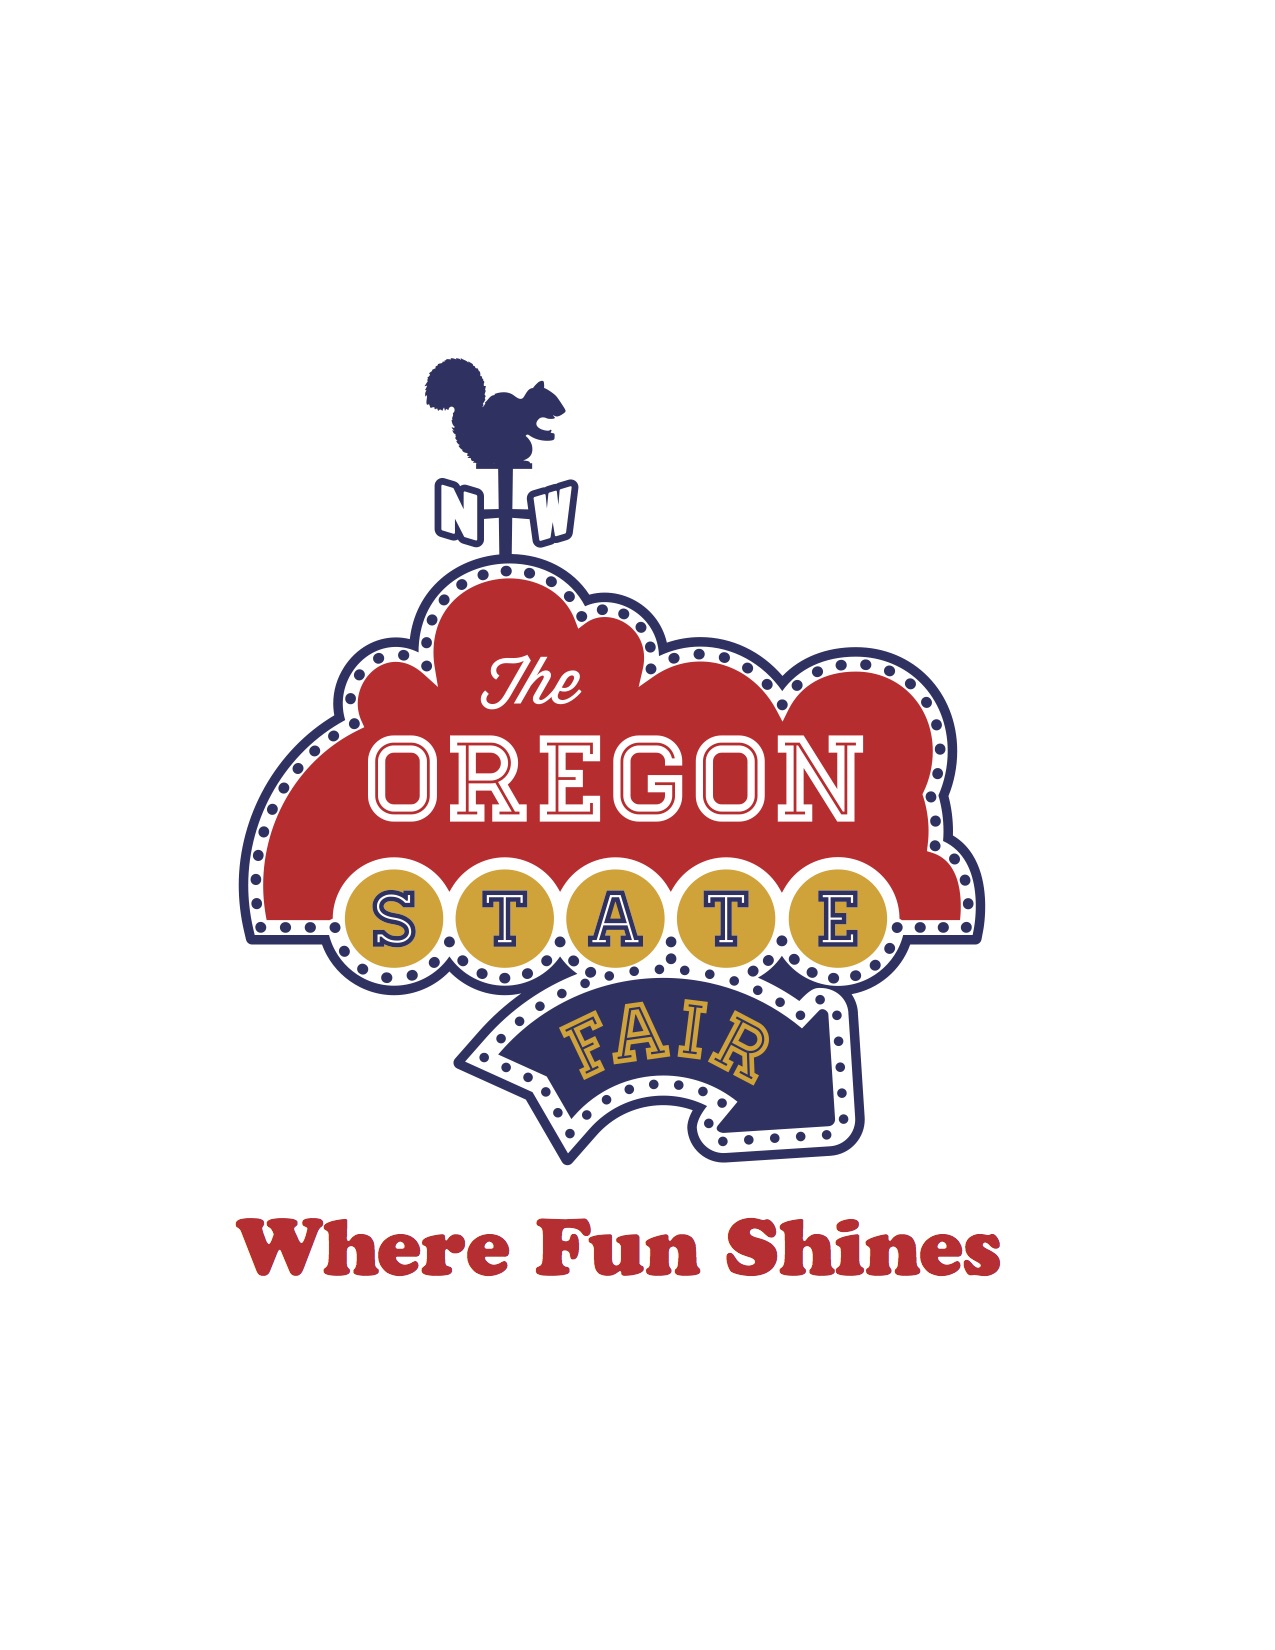 Oregon State Fair Discounted Tickets